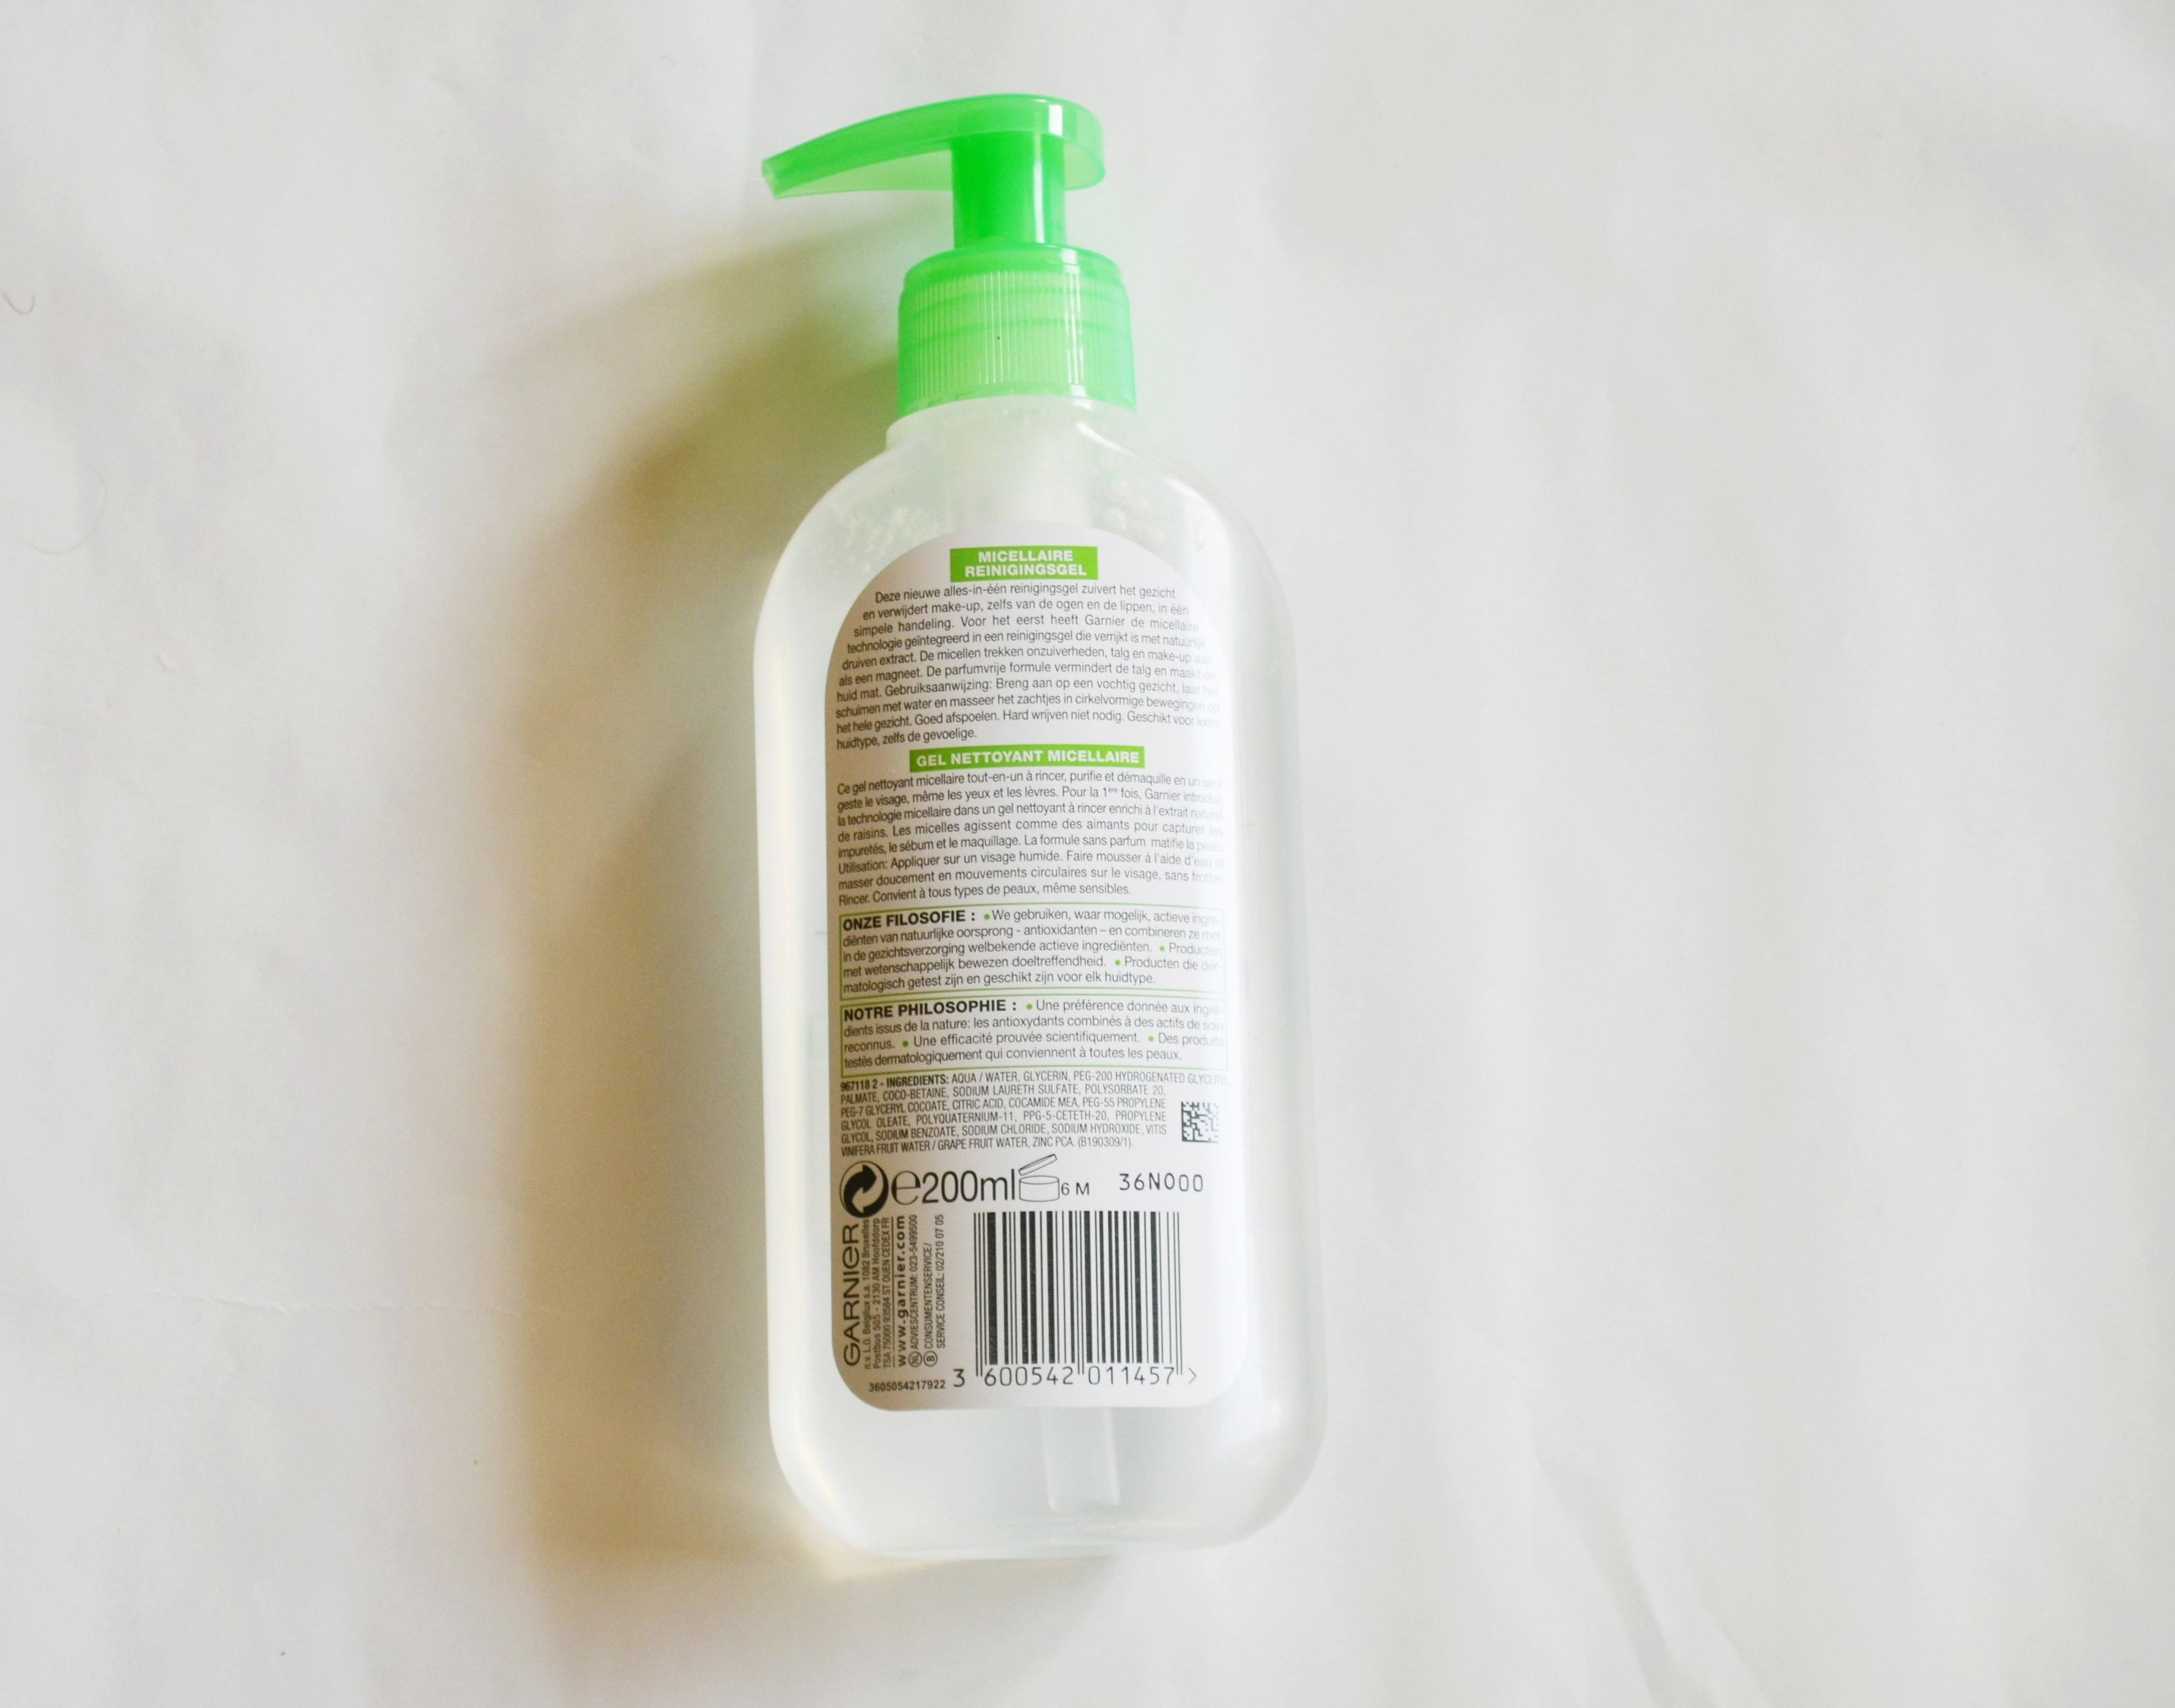 Garnier Skin Active Micellar Cleansing Gel Wash Combination and Sensitive Review4